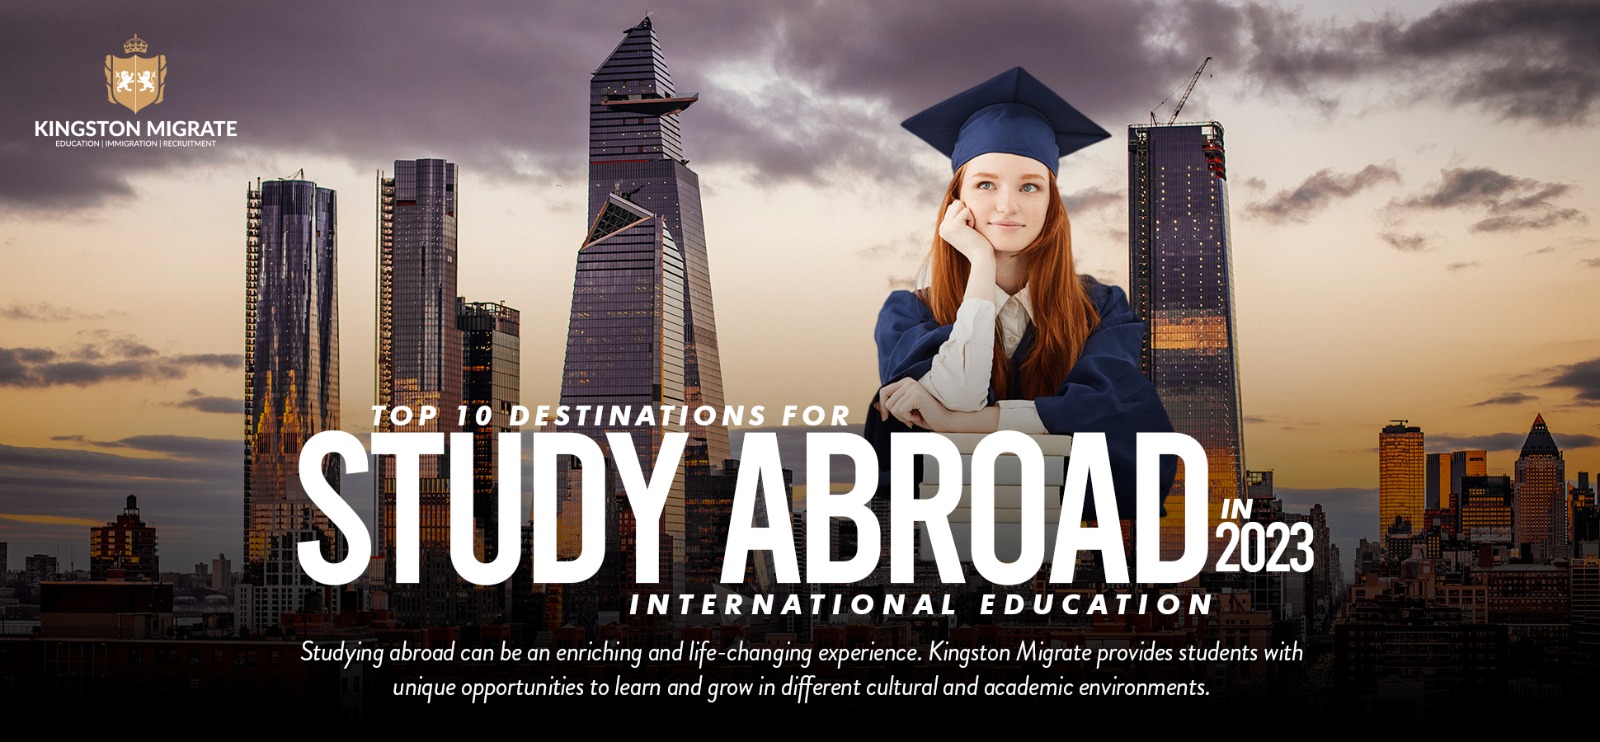 Top 10 Destinations for Studying Abroad in 2023